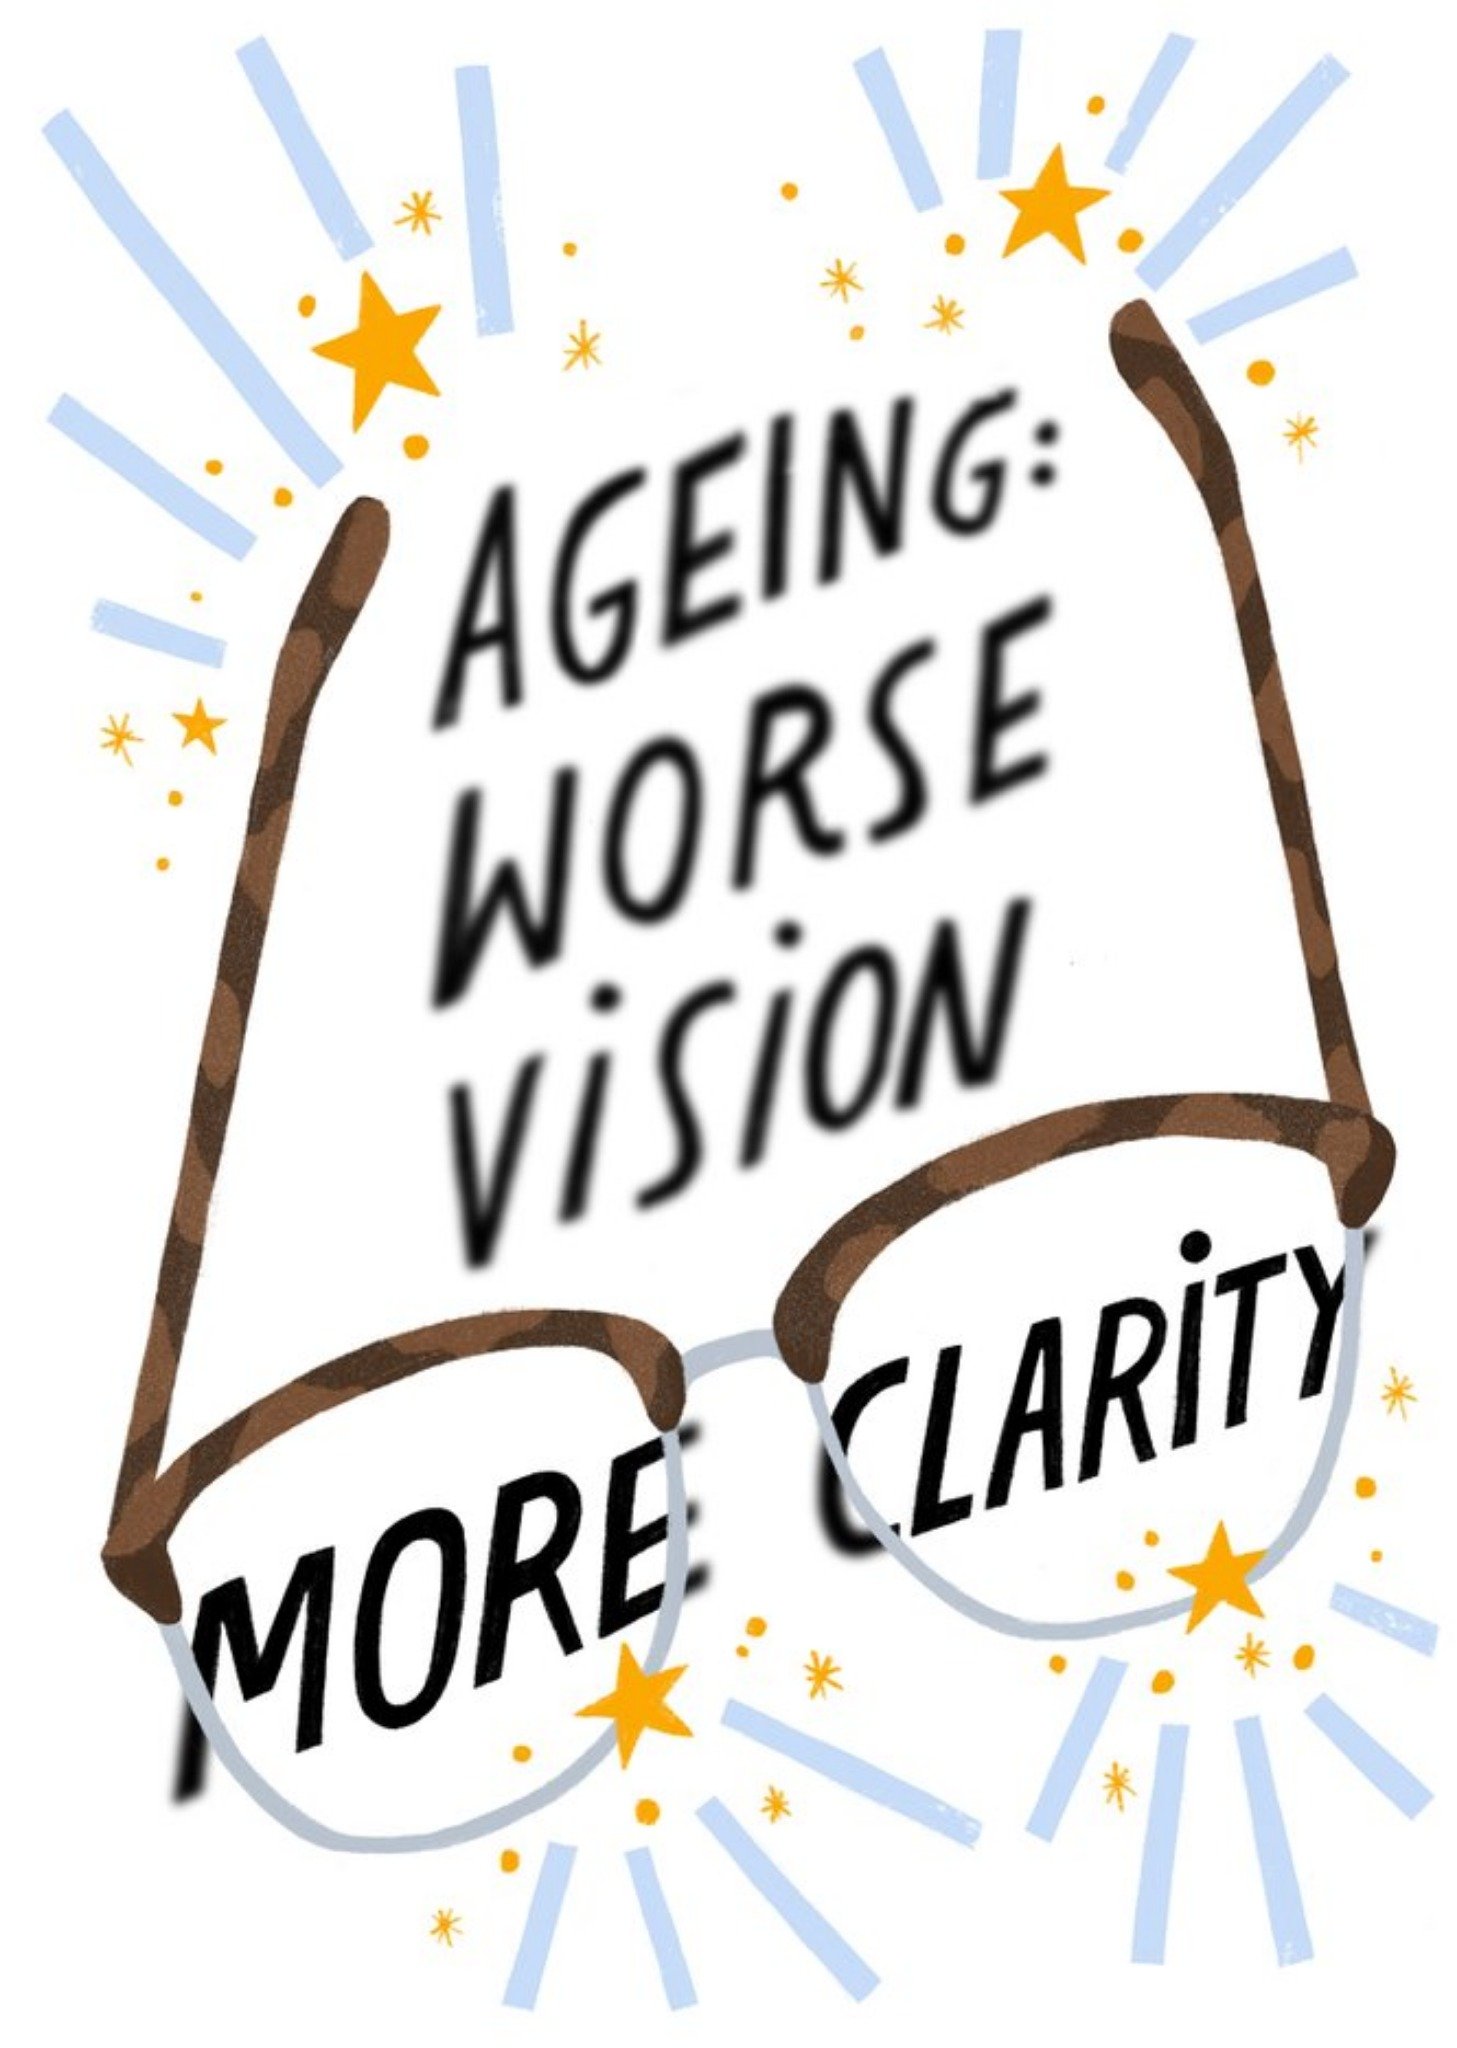 Cardy Club Glasses Aging Ageing Worse Vision More Clarity Card, Large